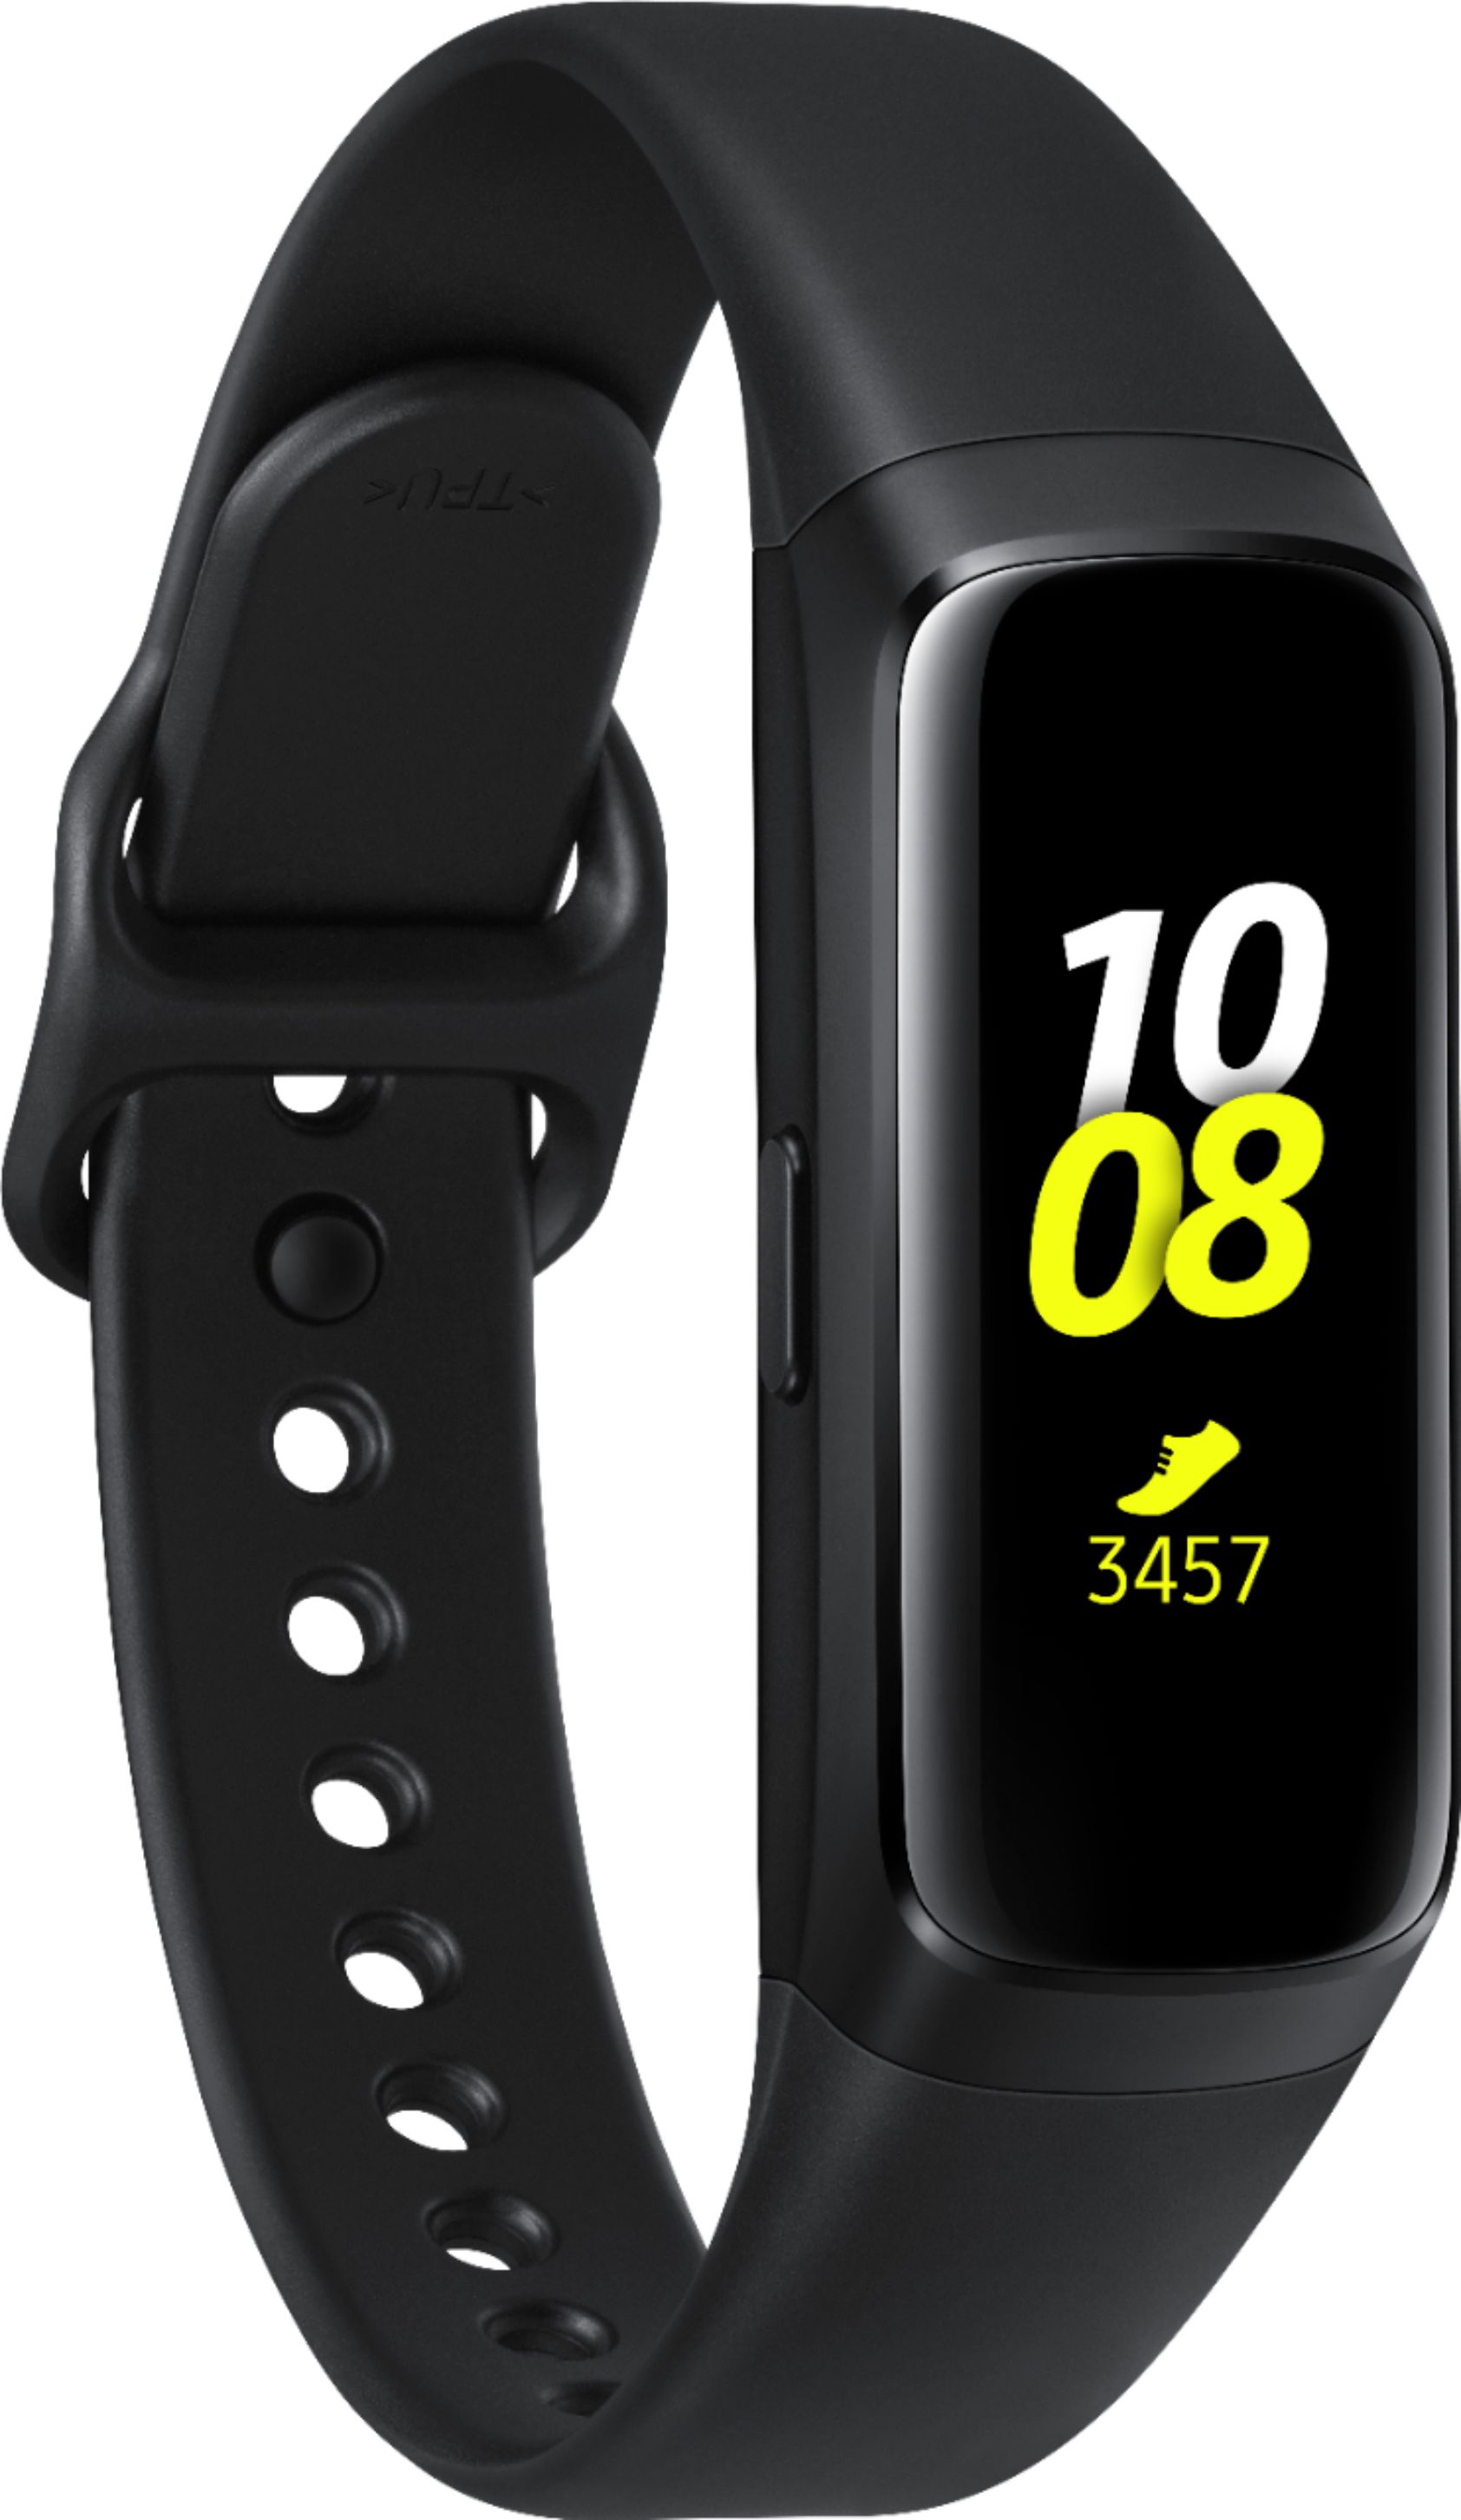 fitness watch with heart rate